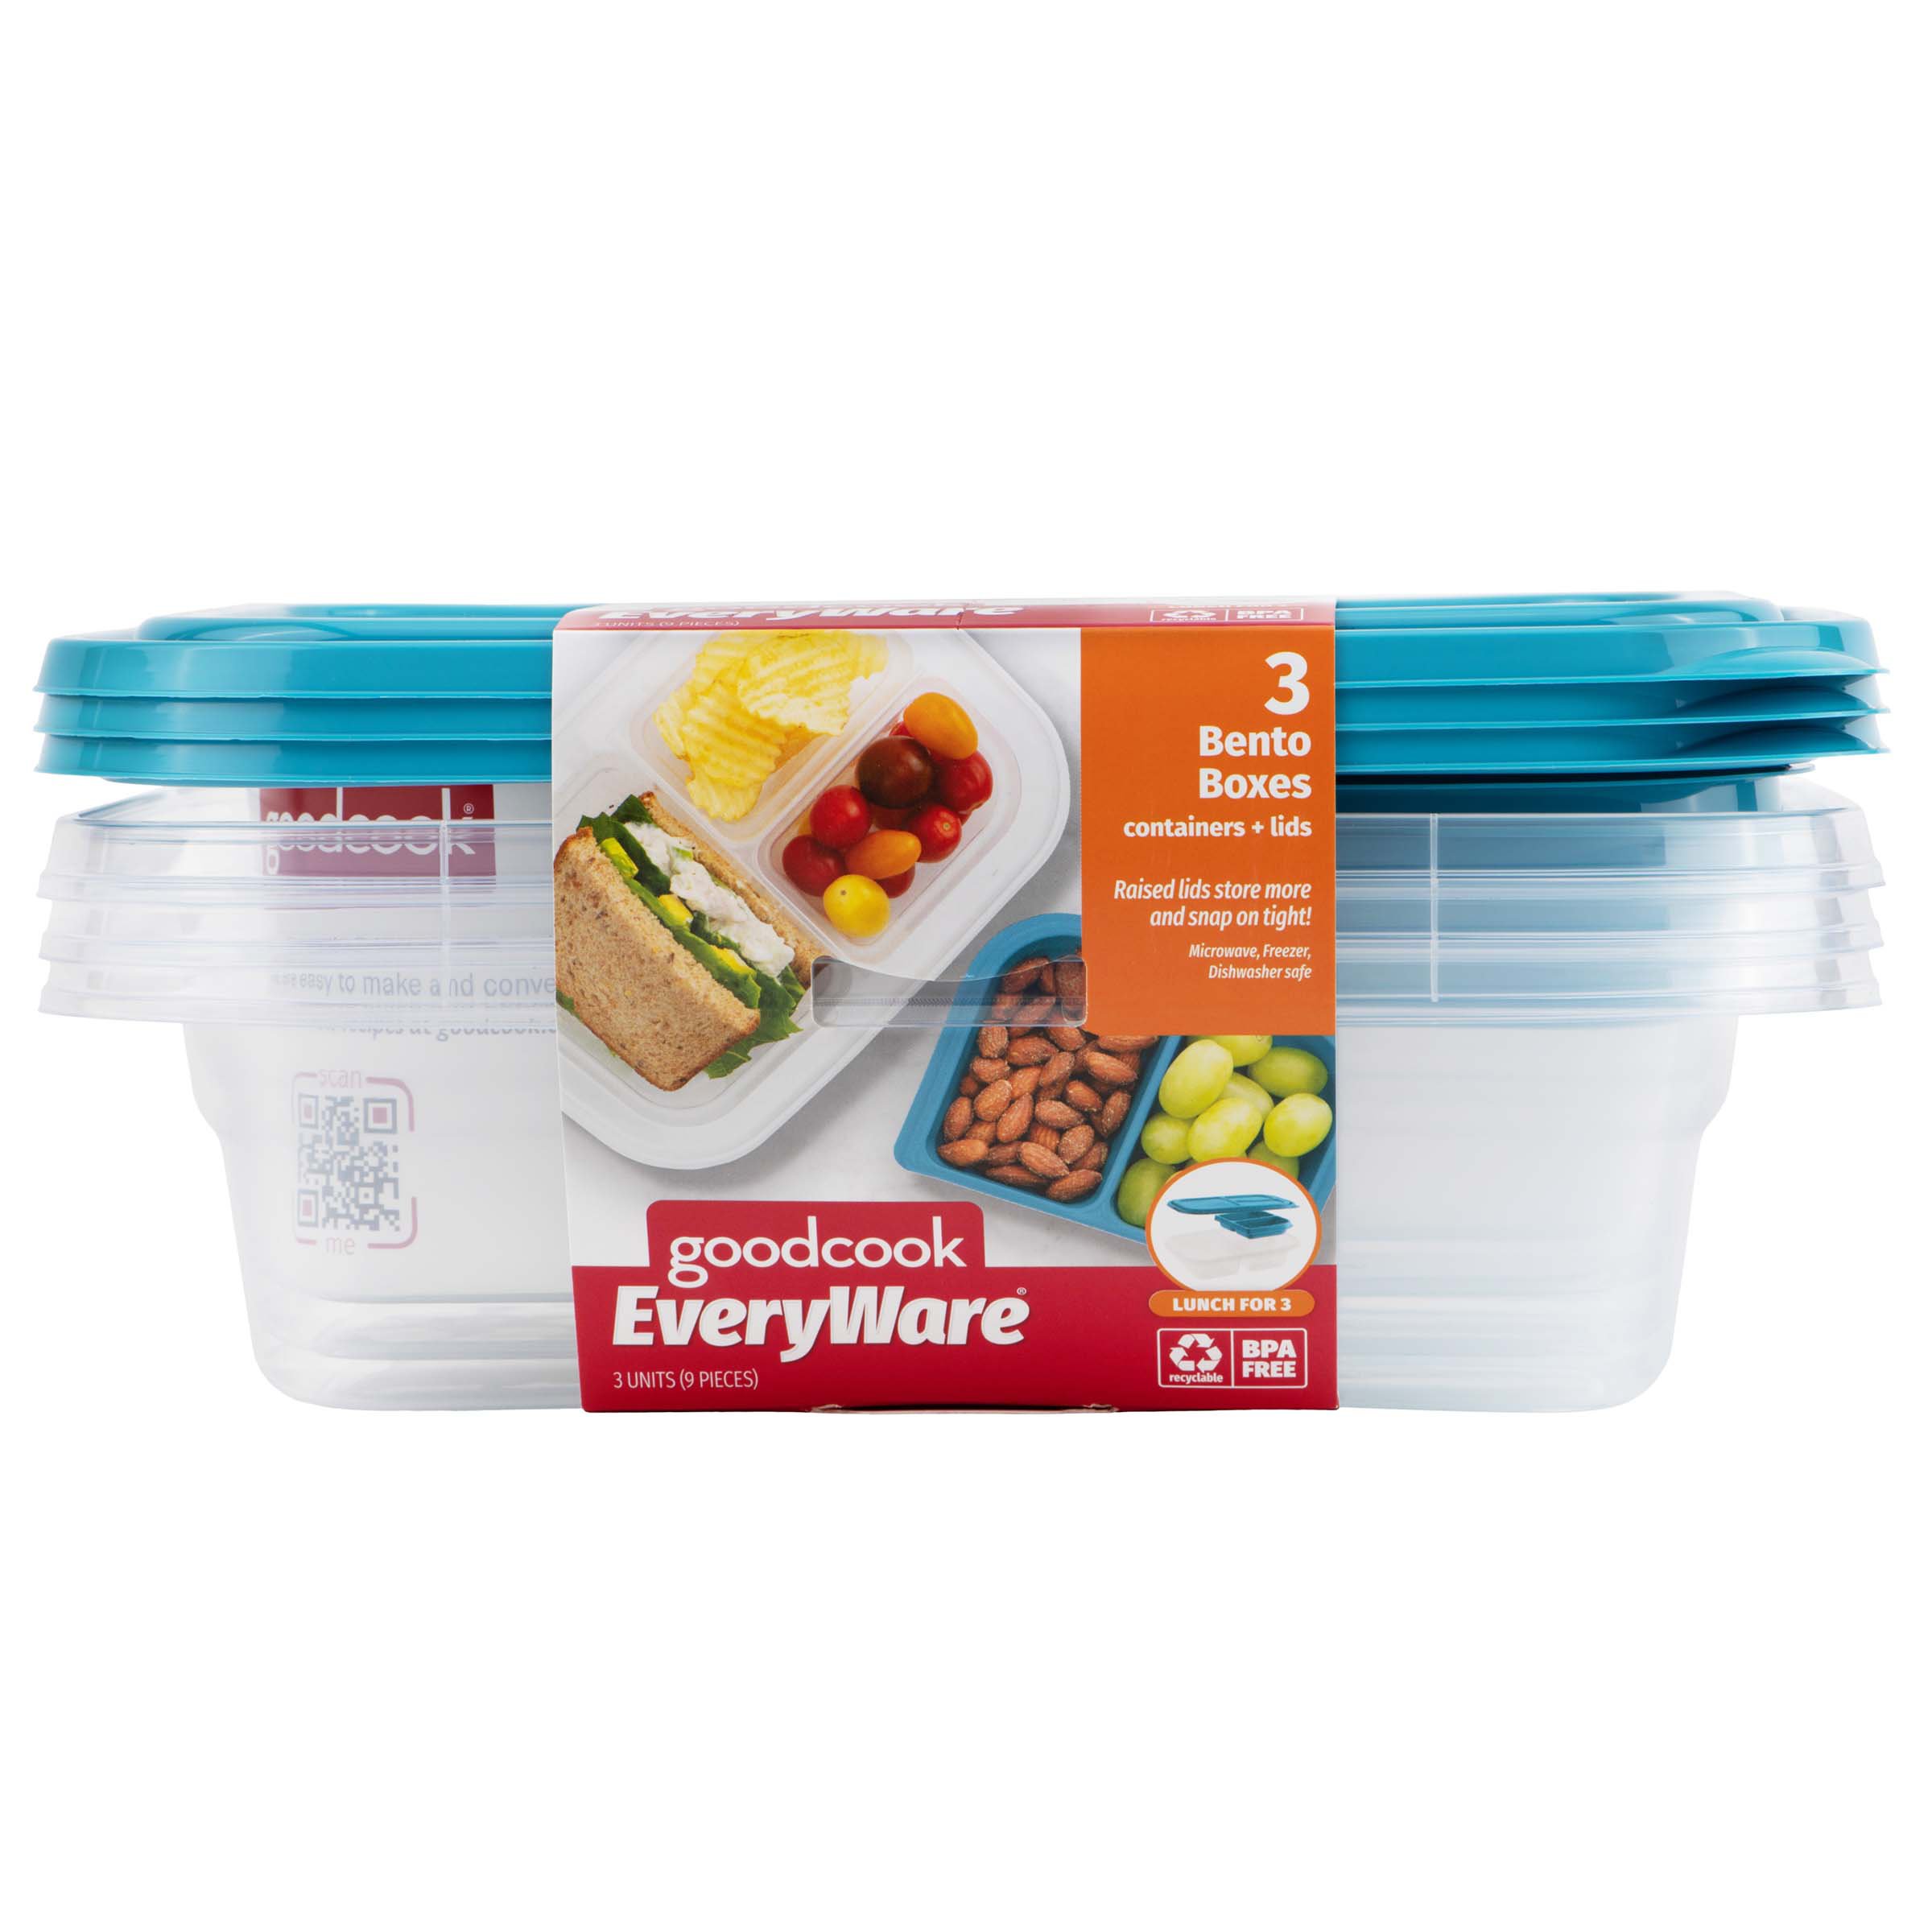 Good Cook EveryWare Bento Box Containers + Lids - Shop Food Storage at H-E-B